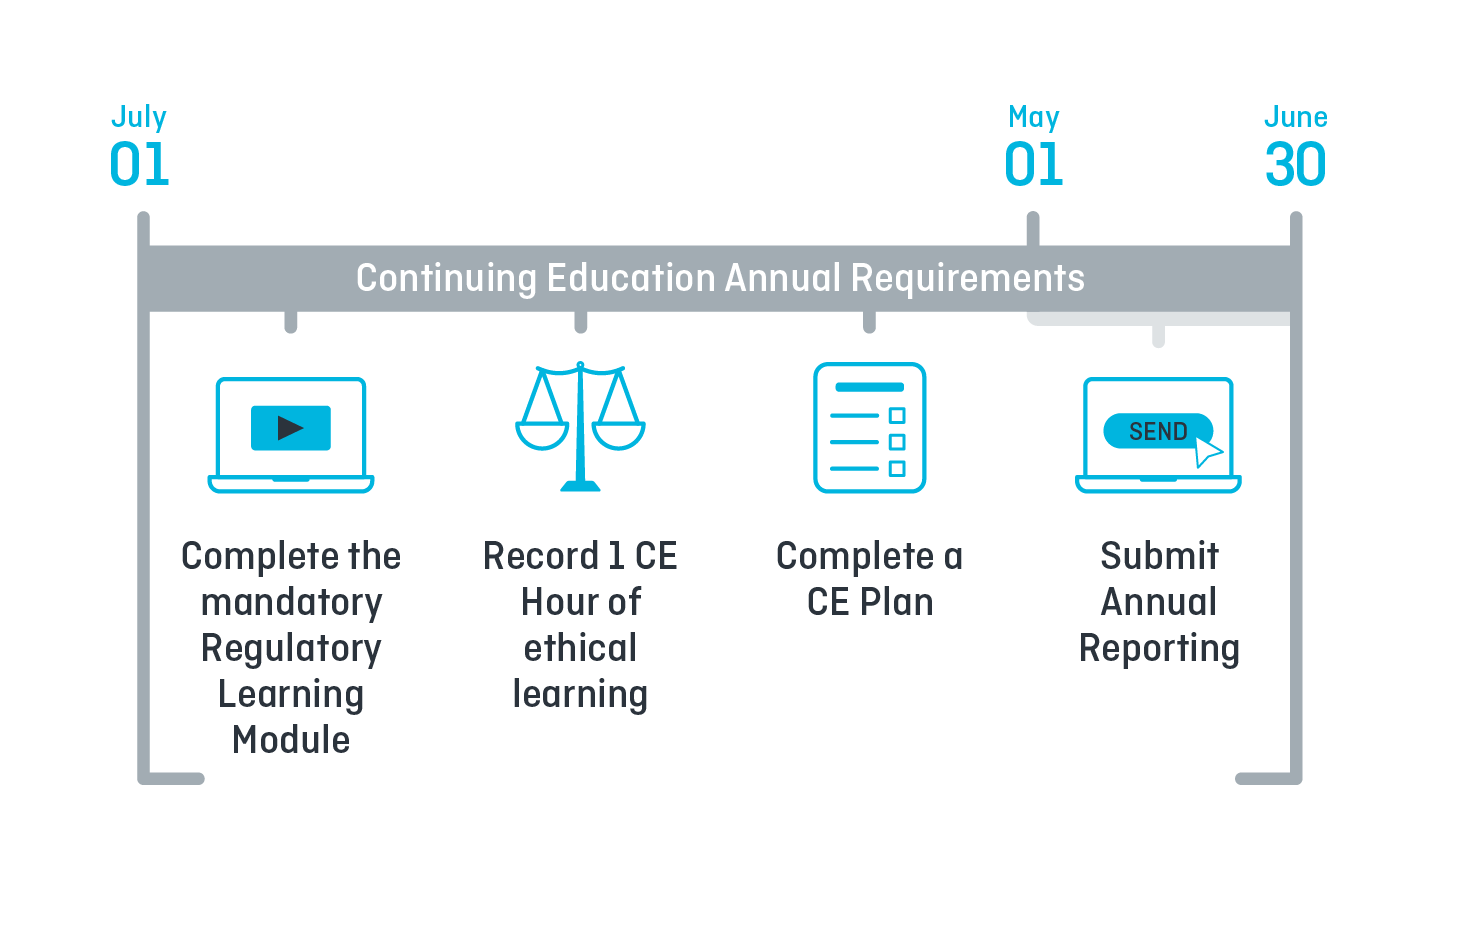 Each year, registrants must complete the mandatory Regulatory Learning Module, record one CE Hour of ethical learning, complete their CE Plan, and then declare all CE requirements have been completed by submitting Annual Reporting.